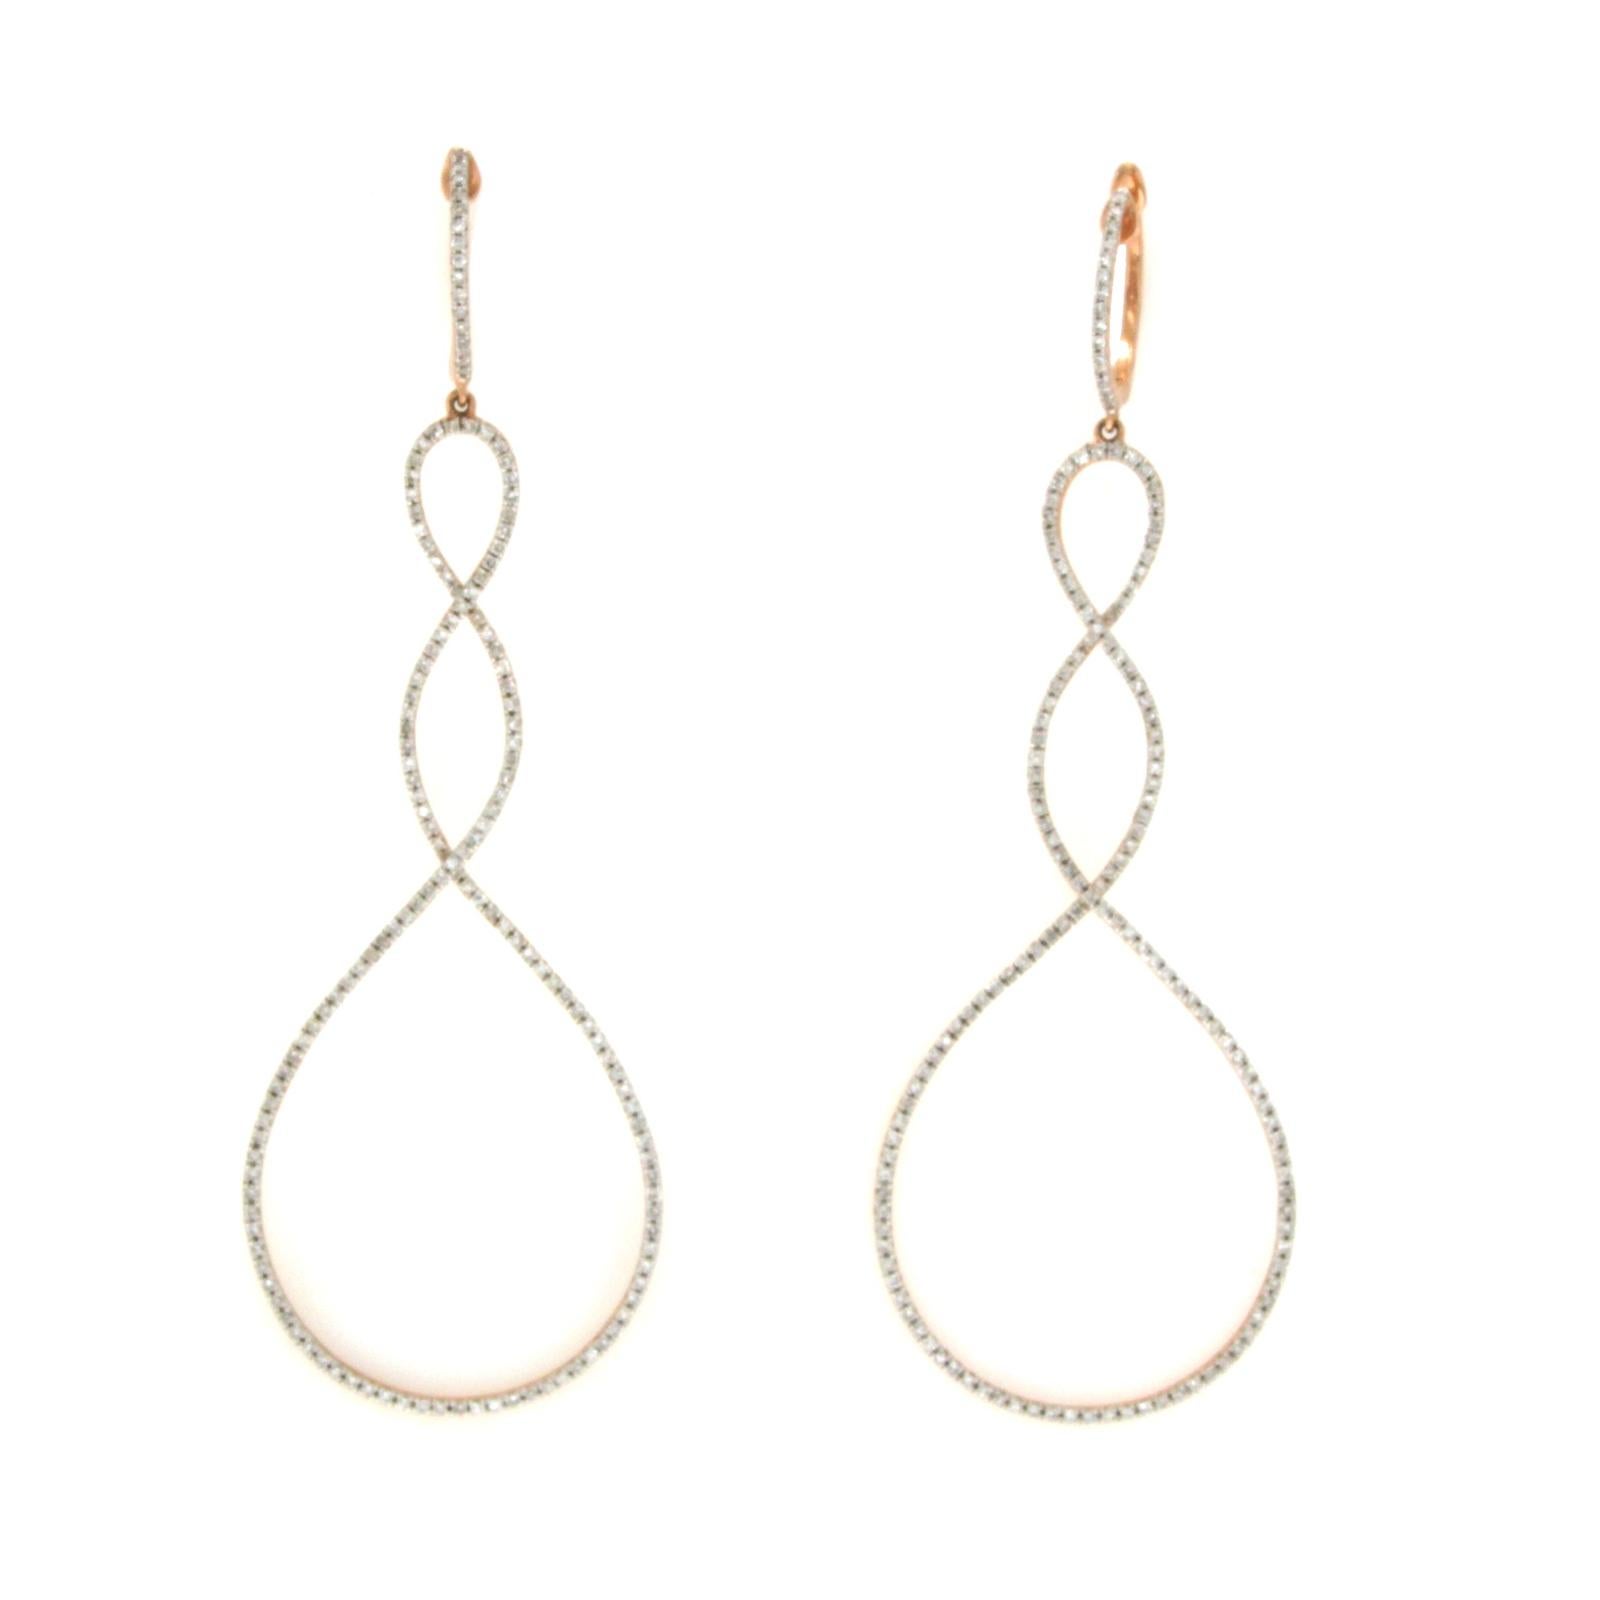 0.86 Carat Pave I Color Si1 Diamonds in 14 Rose Gold Hoop Earrings